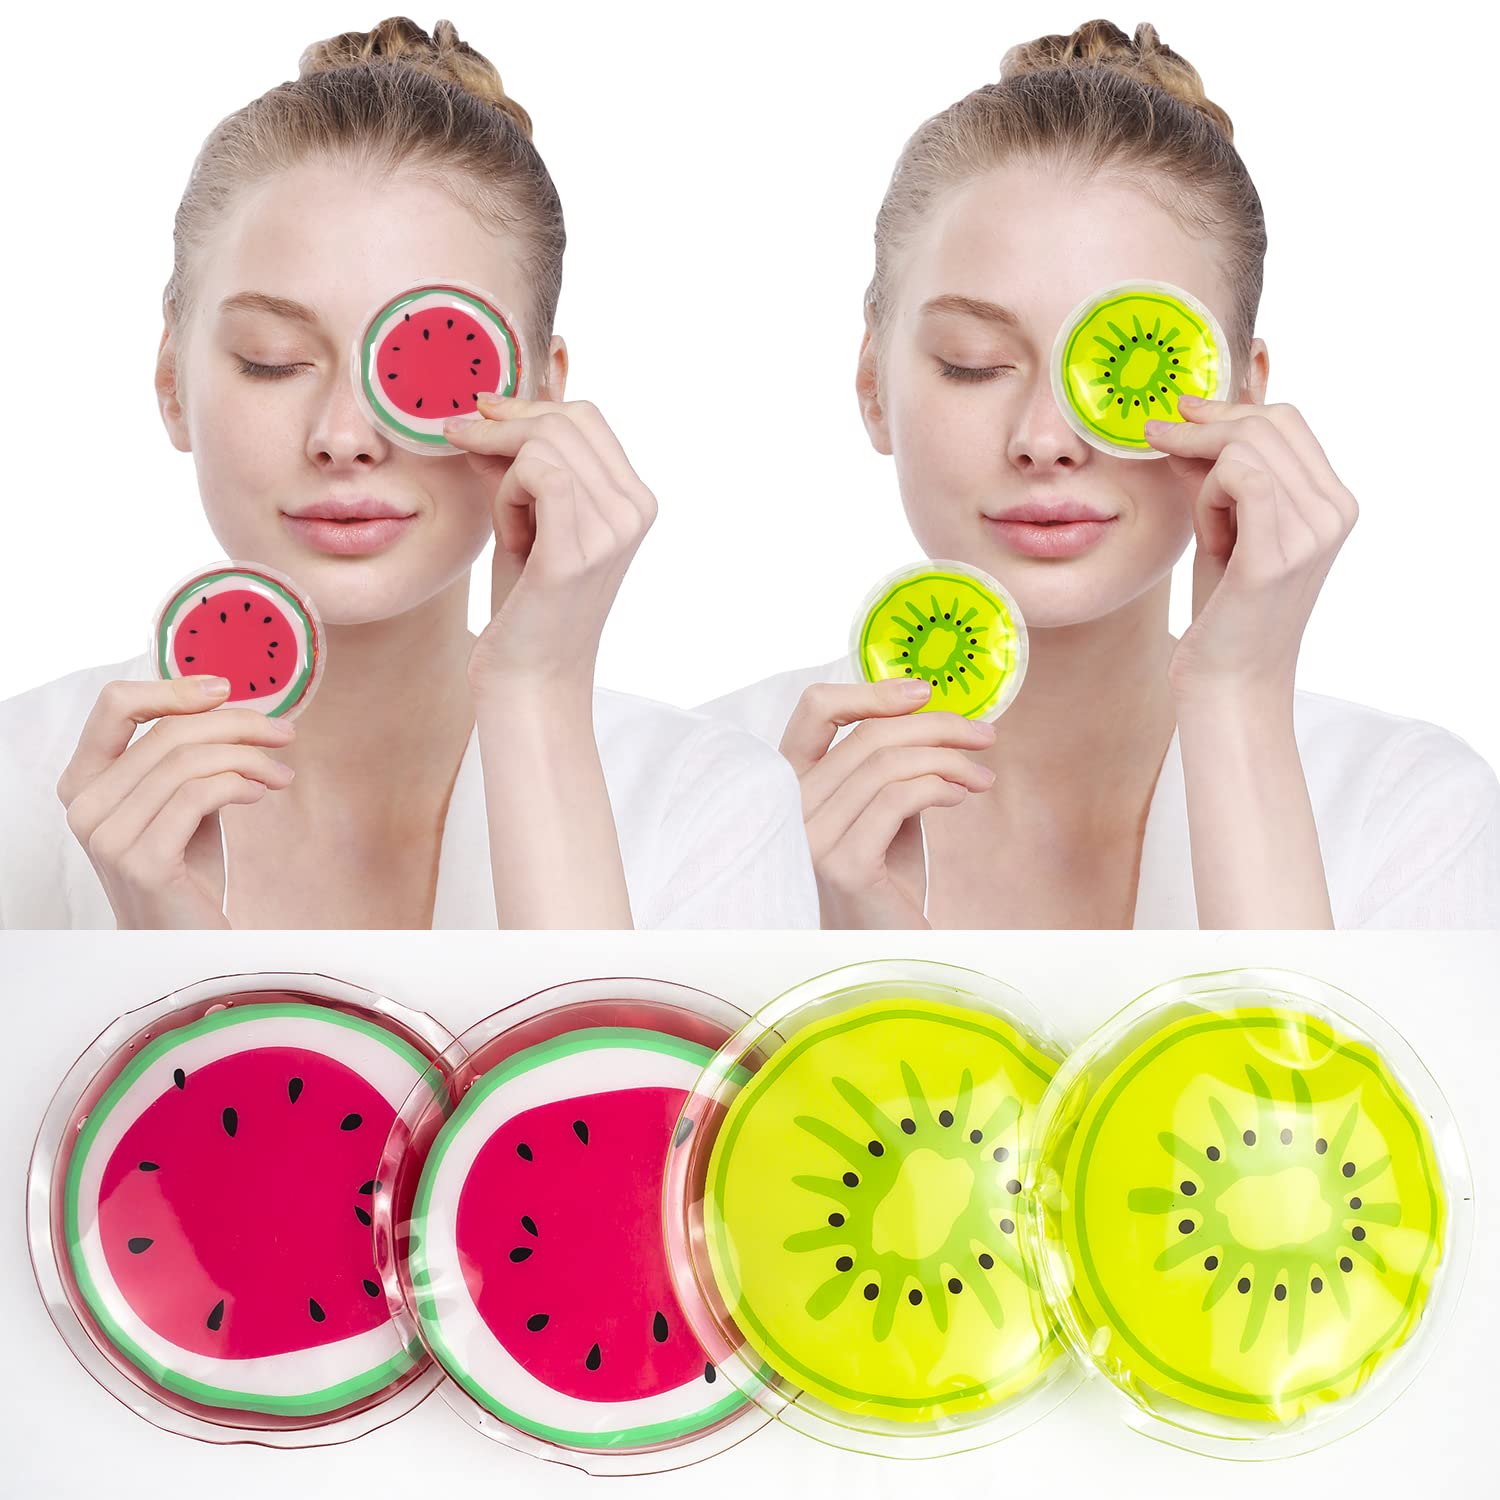 Reusable Gel Eye Pads And Under Eye Patches For Hot And Cold Therapy  Soothes Redness Relieves Pain And Promotes Eye Relaxation, Shop The Latest  Trends